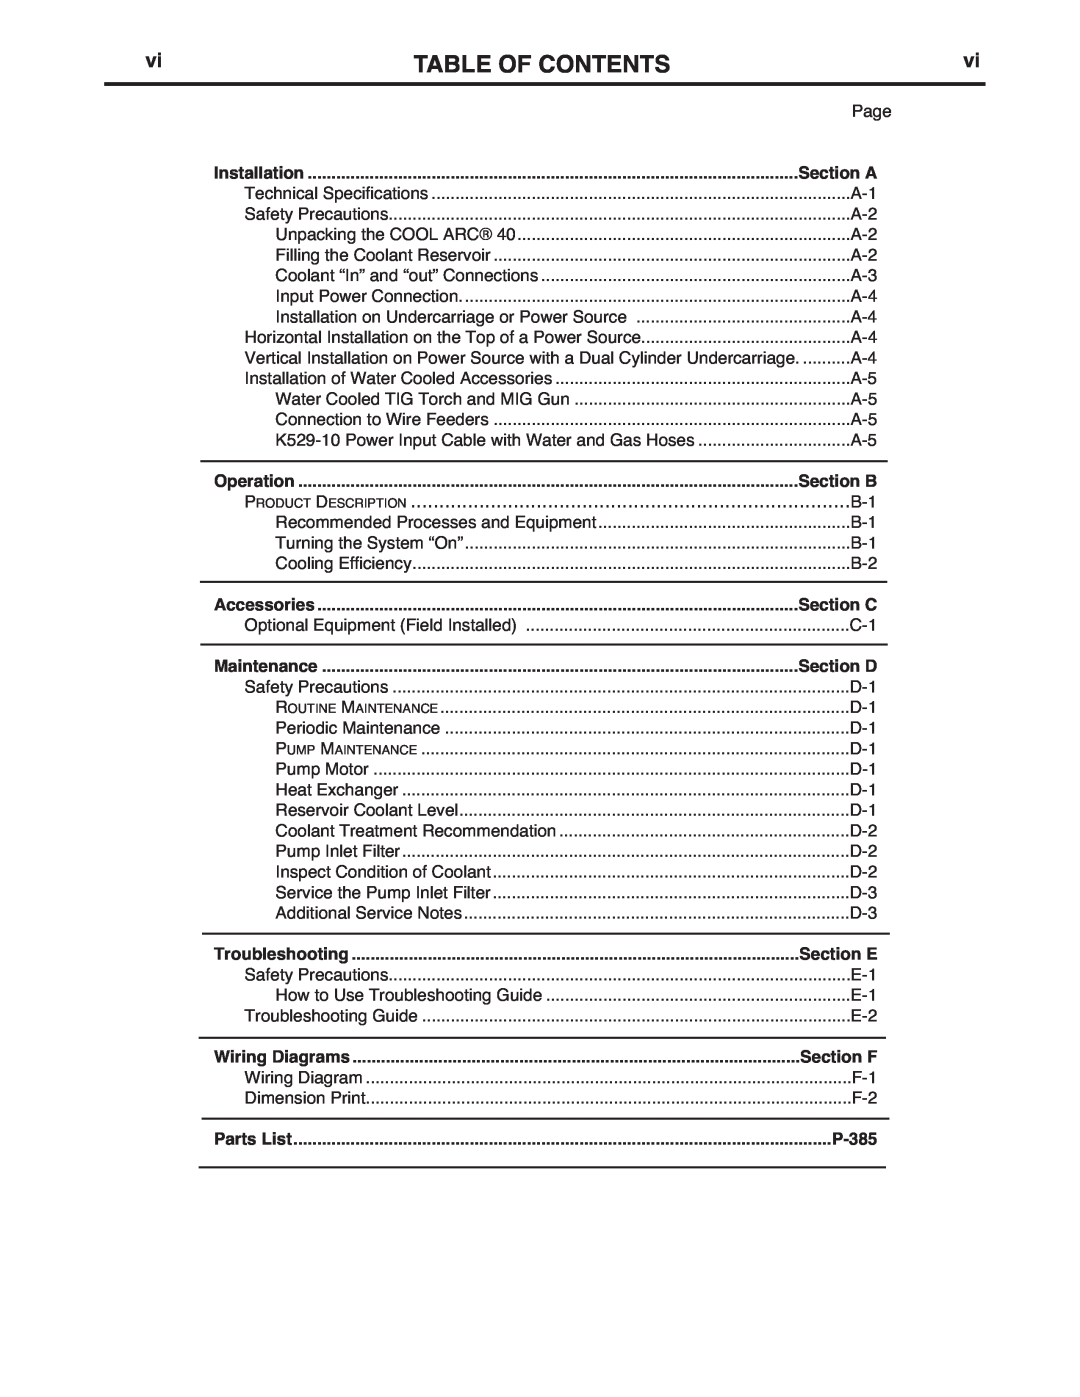 Lincoln Electric IM670-A manual Table Of Contents, Product Description, Section E, Section F, P-385 